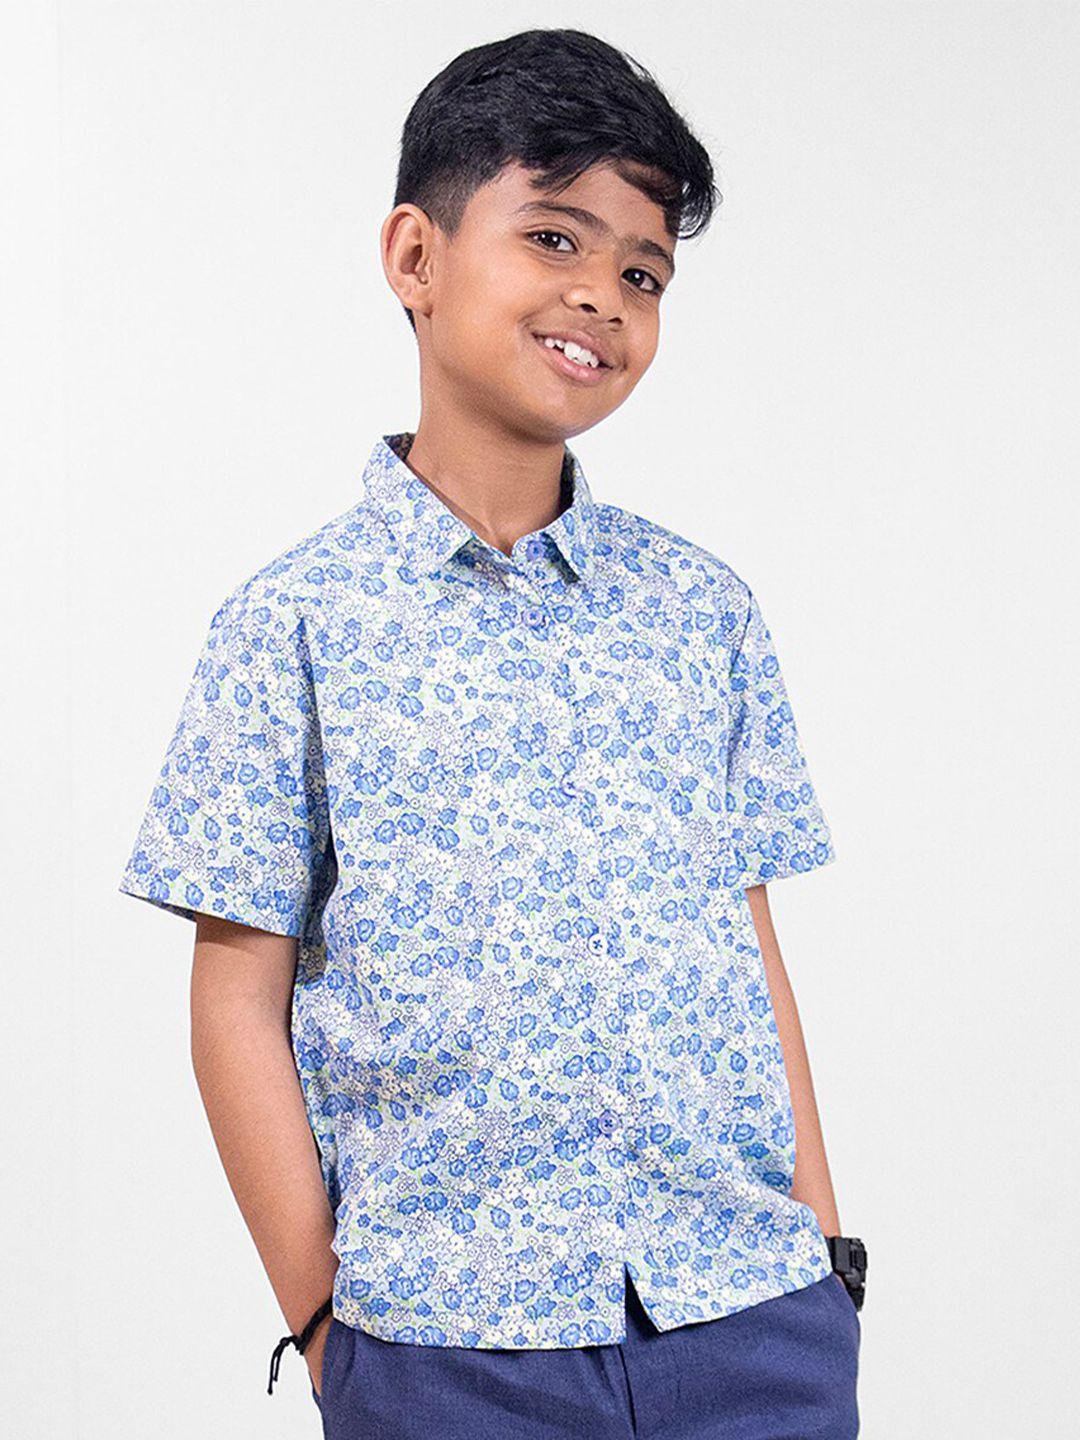 whistle & hops boys classic floral printed pure cotton casual shirt